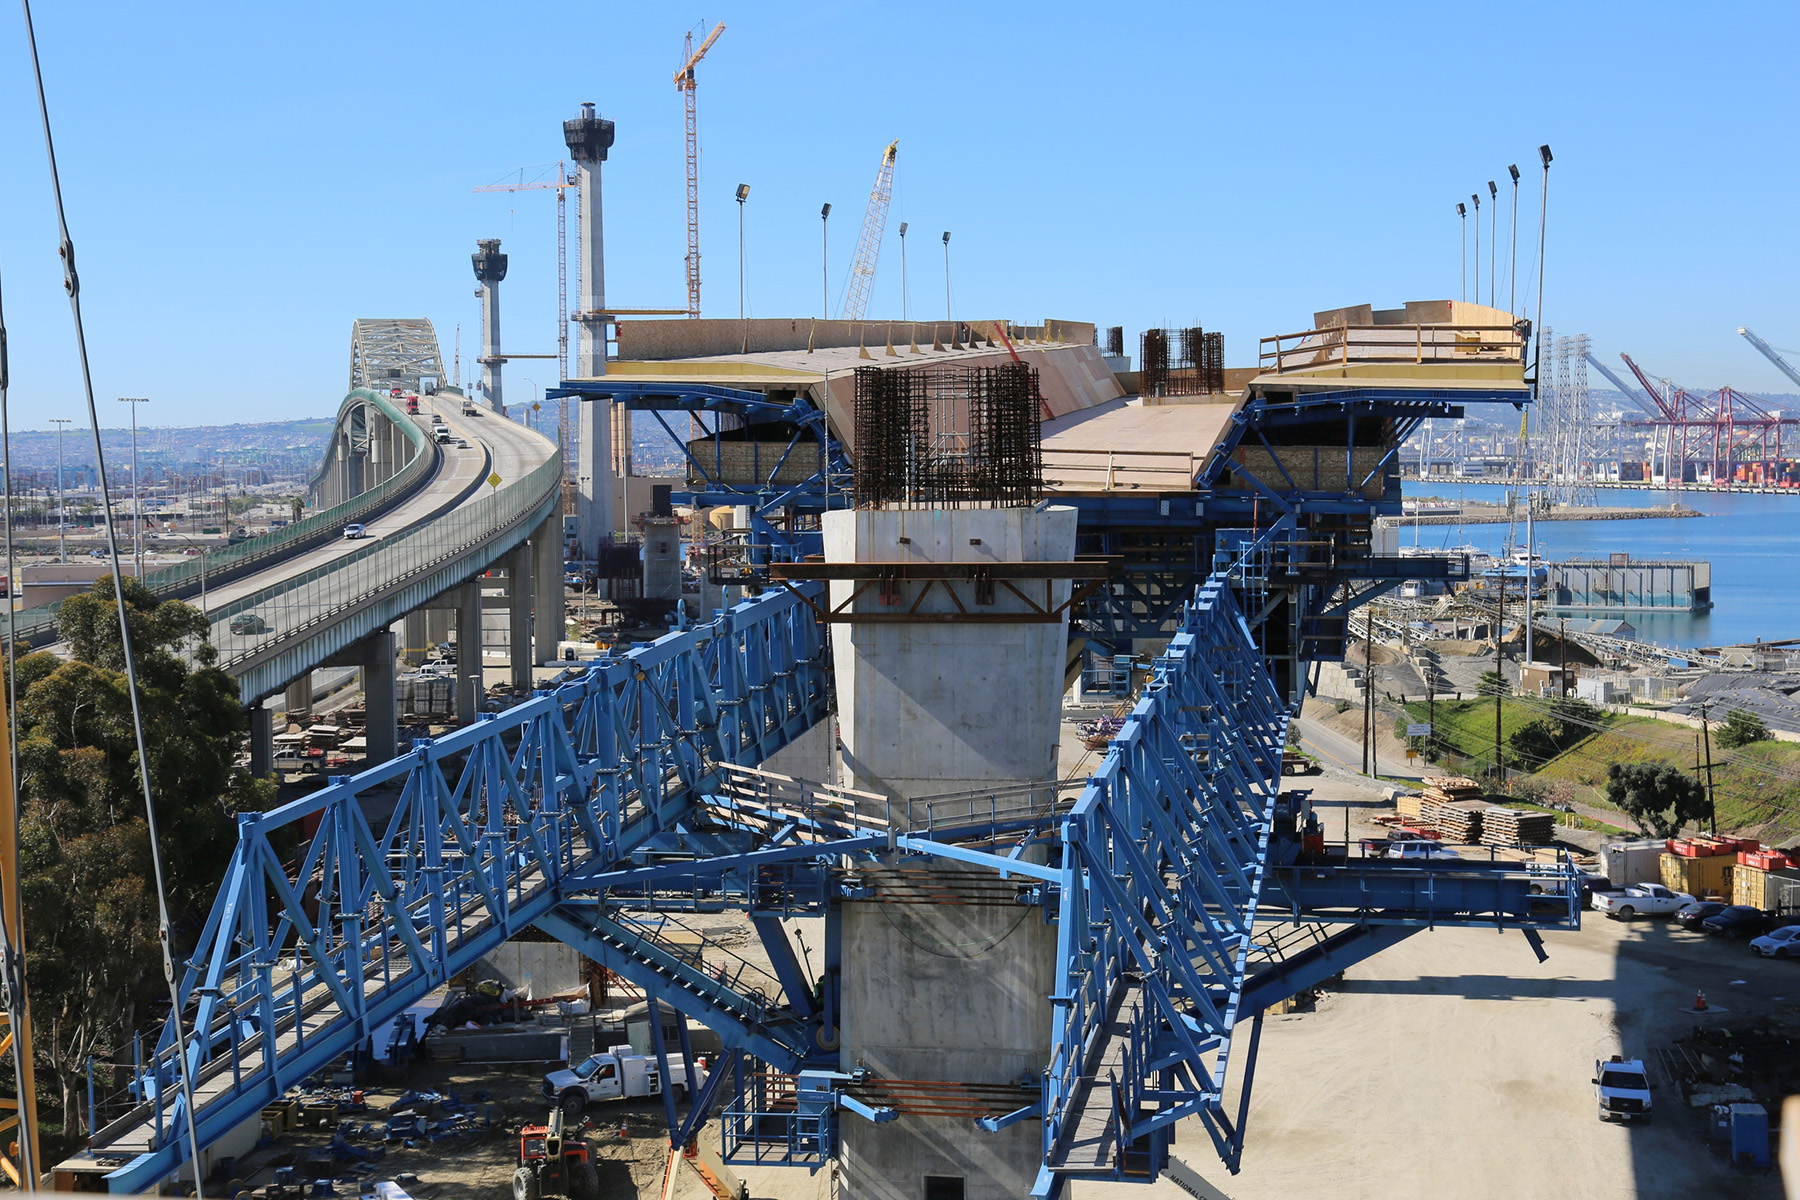 photograph of the movable scaffolding during construction of the Gerald Desmond Bridge